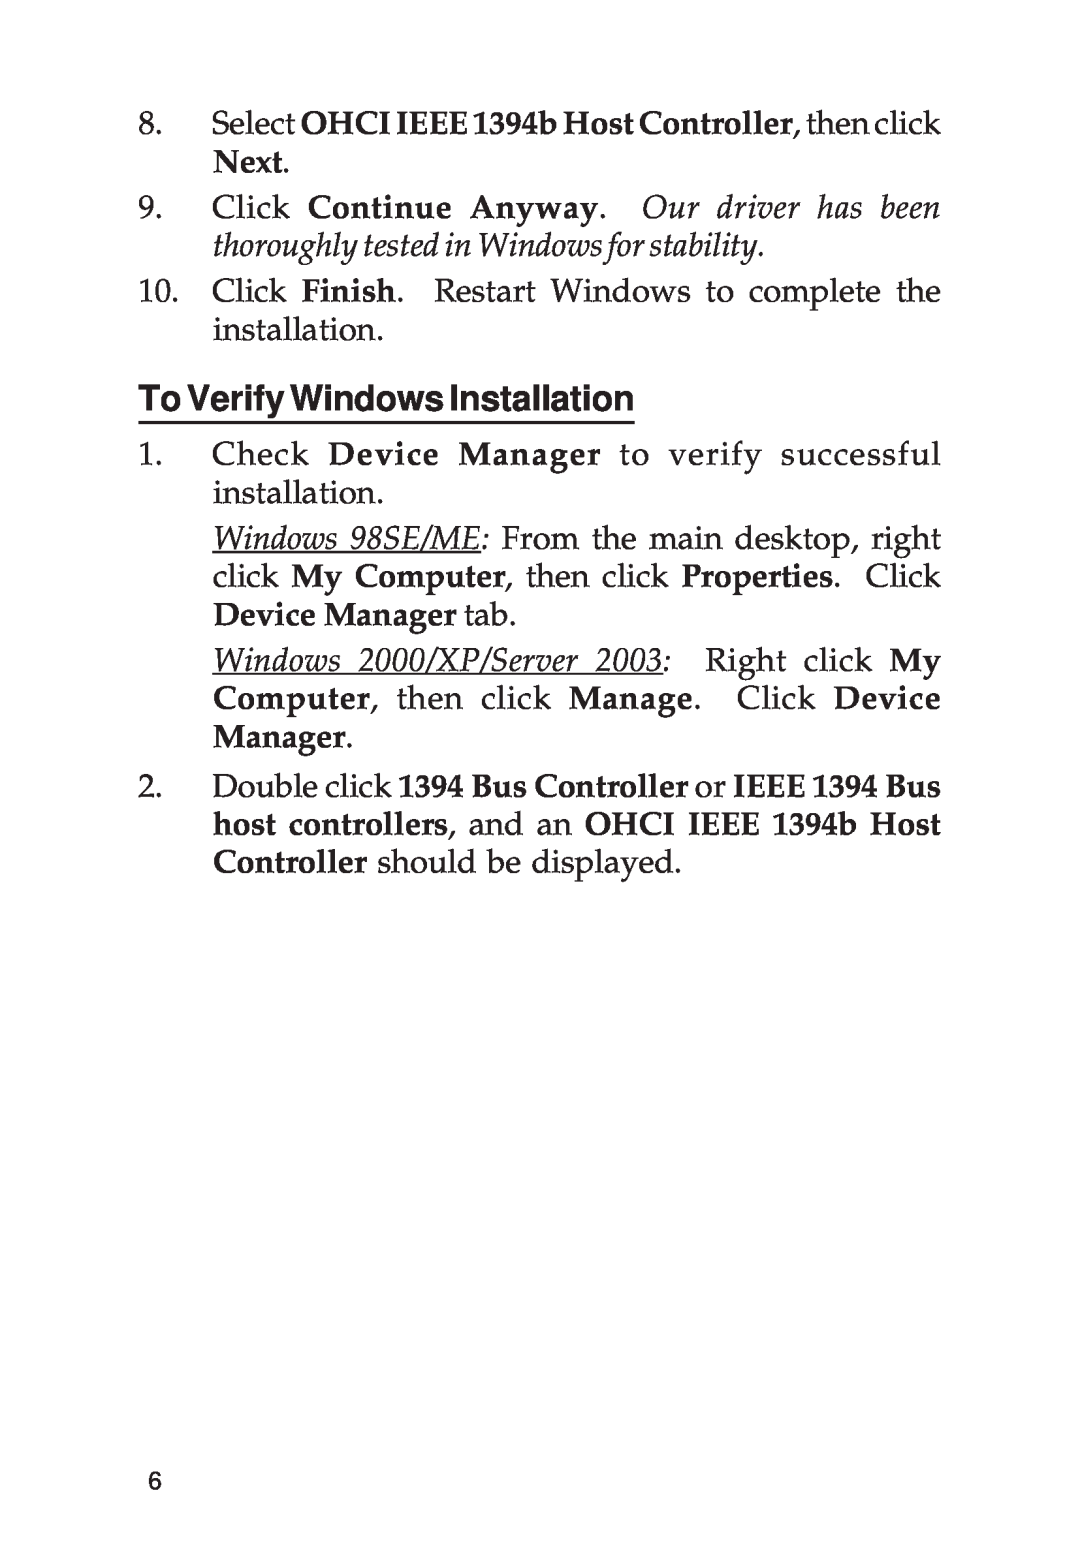 SIIG 700 manual To Verify Windows Installation, Select OHCI IEEE 1394b Host Controller, then click Next 